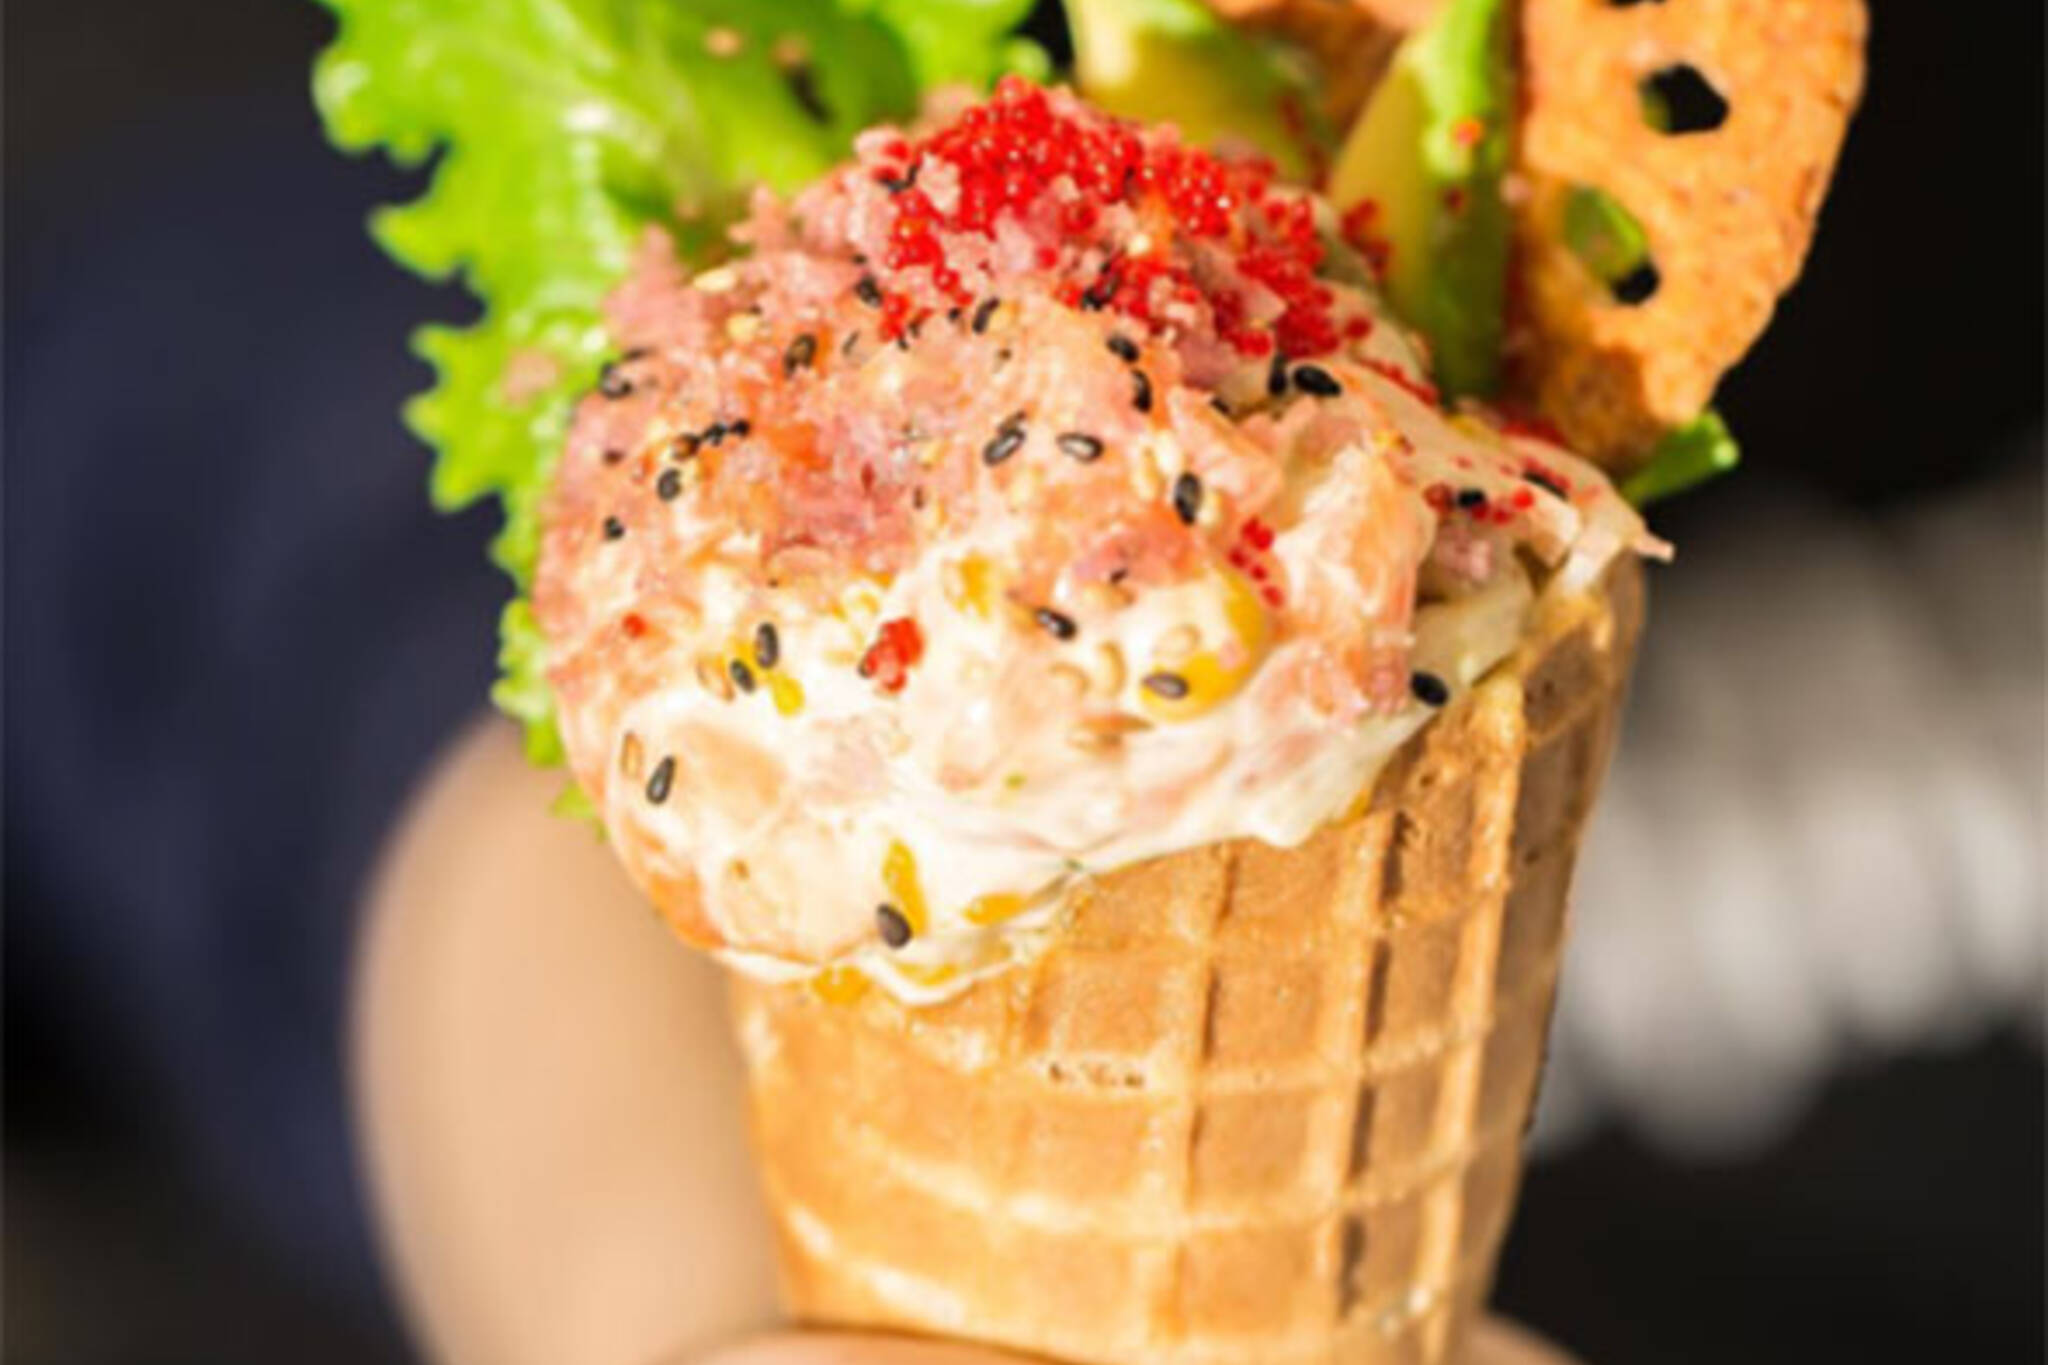 You can now eat sushi in an ice cream cone in Toronto